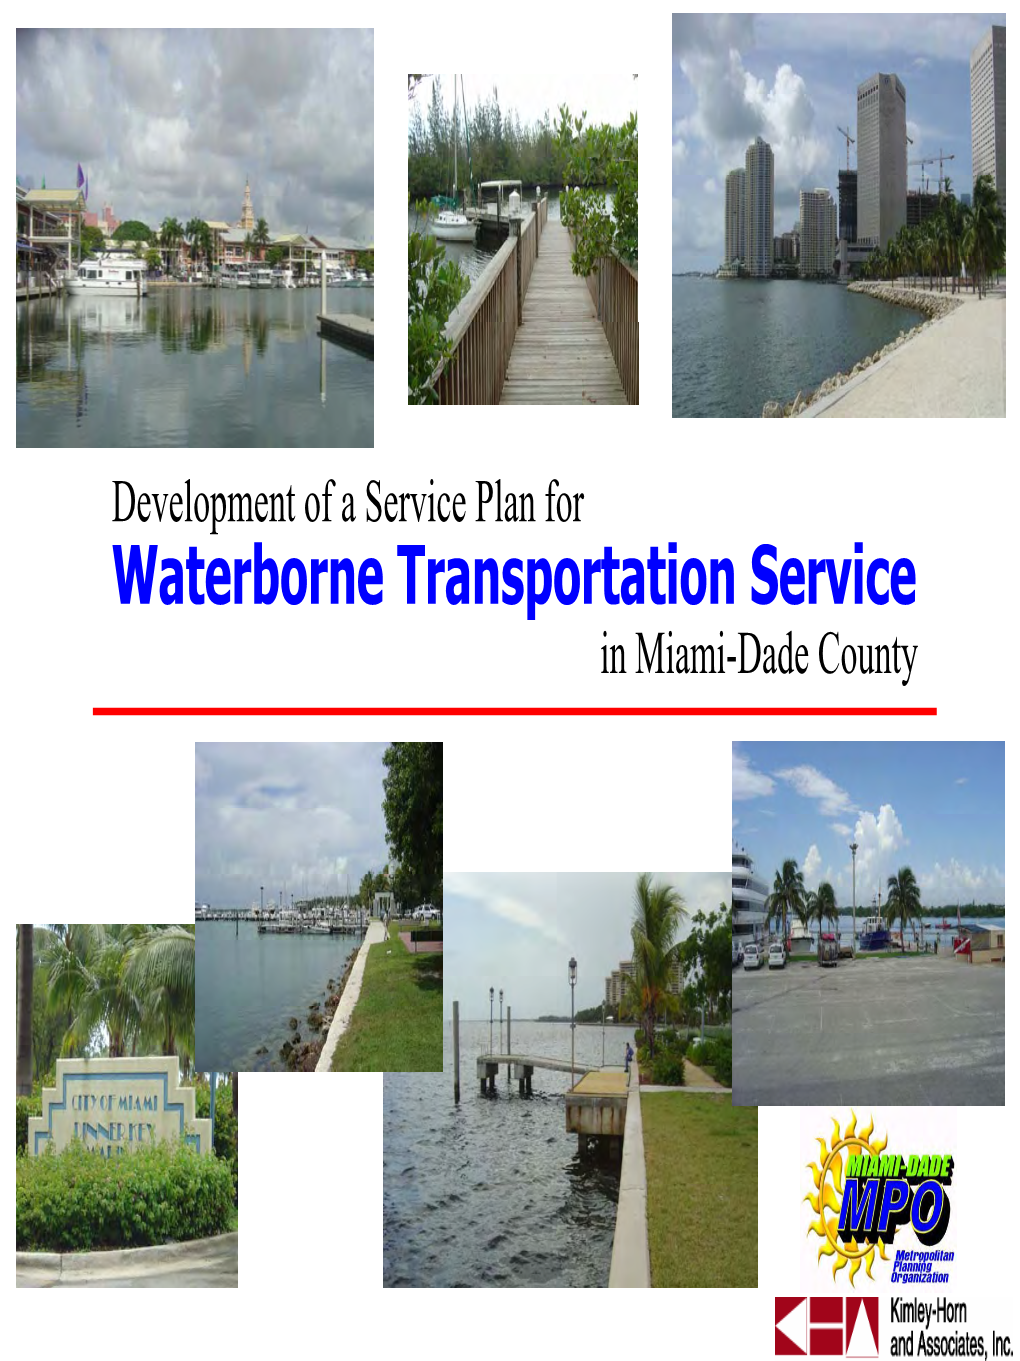 Development of a Service Plan for Waterborne